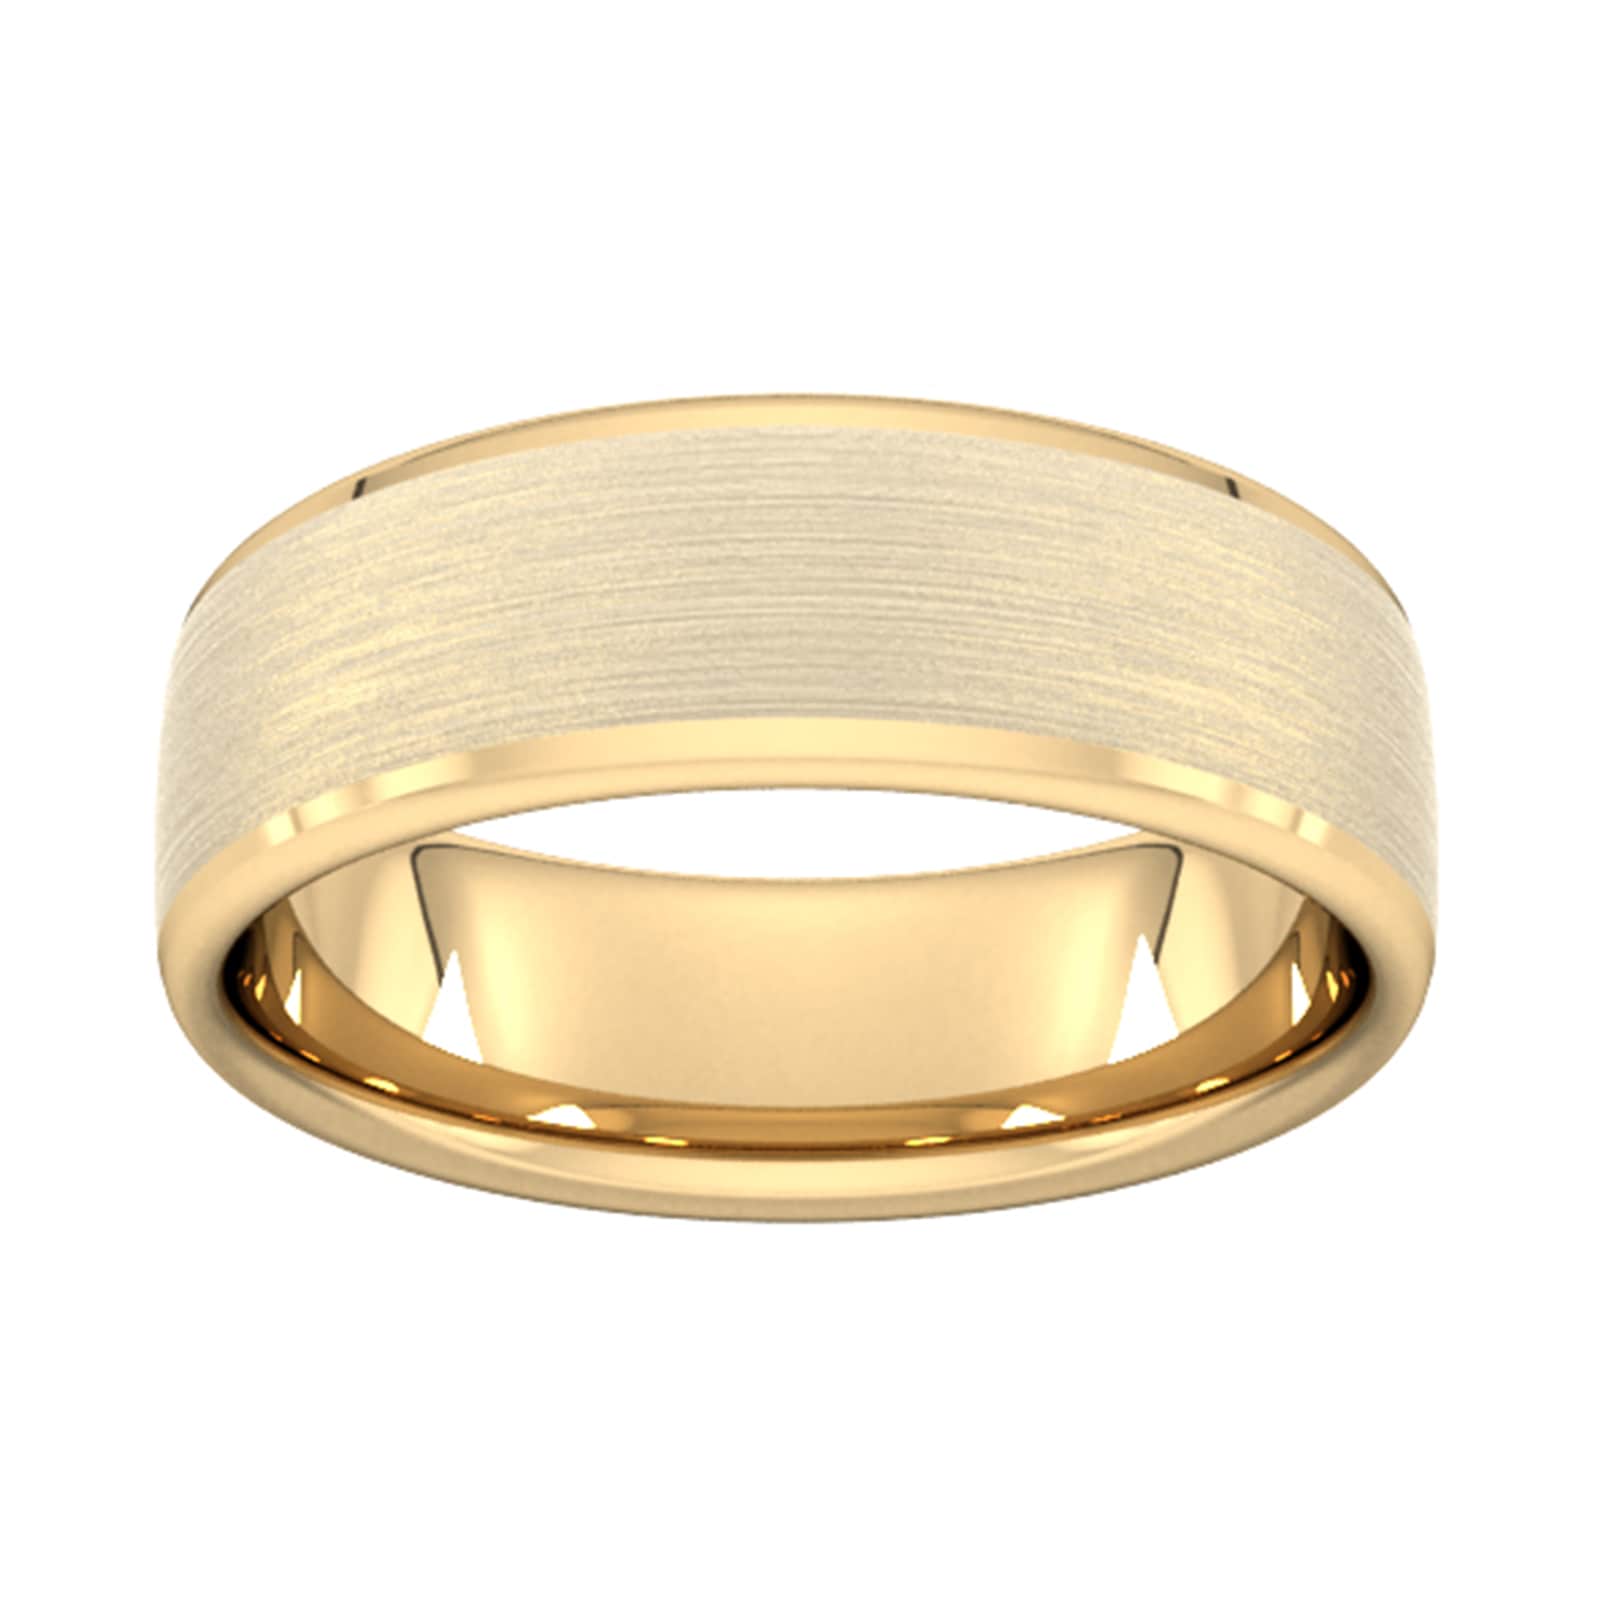 7mm Traditional Court Heavy Polished Chamfered Edges With Matt Centre Wedding Ring In 9 Carat Yellow Gold - Ring Size N